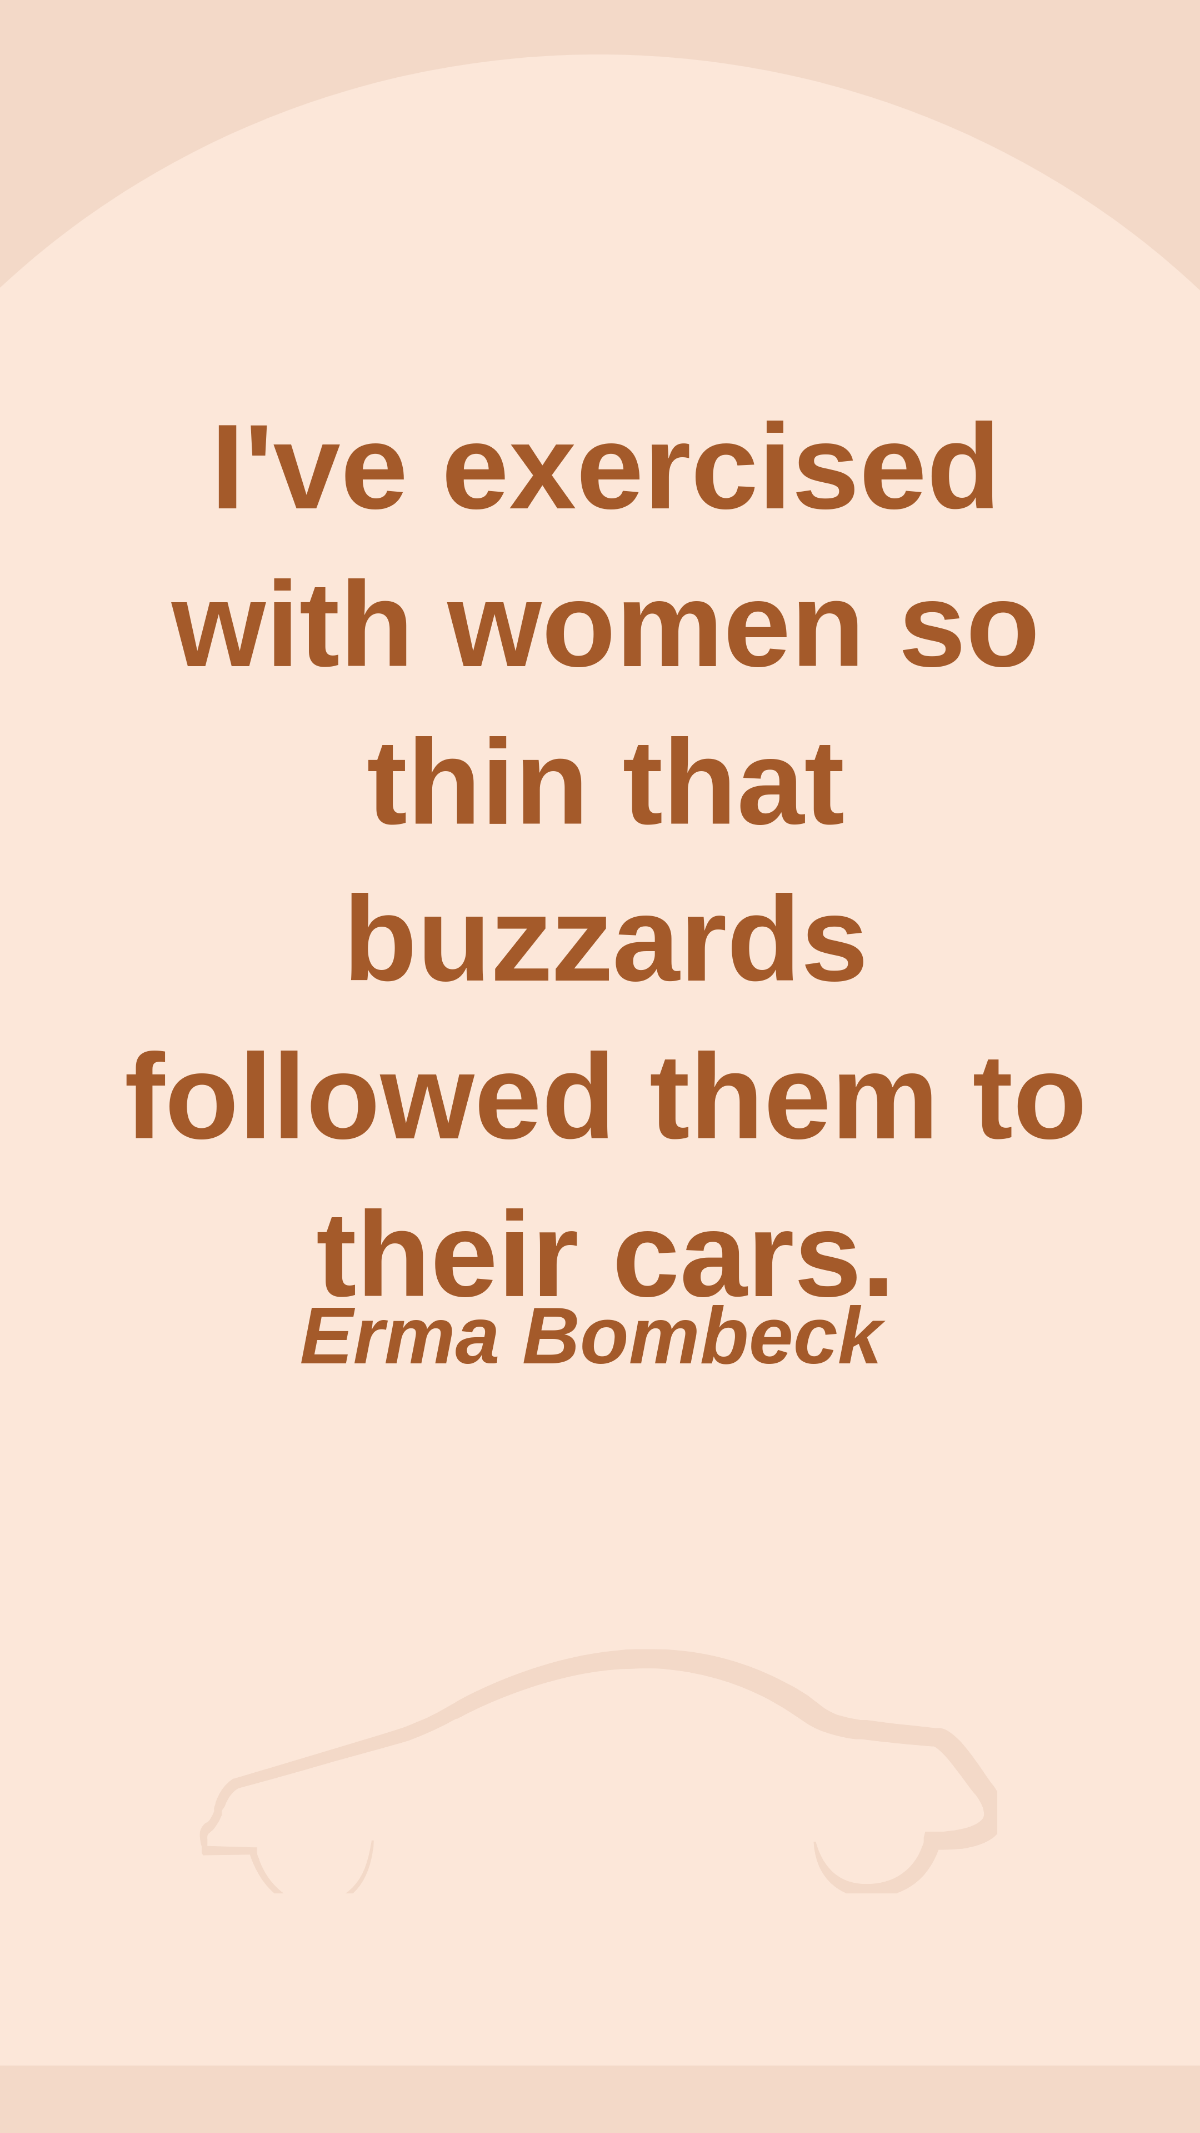 Erma Bombeck - I've exercised with women so thin that buzzards followed them to their cars.